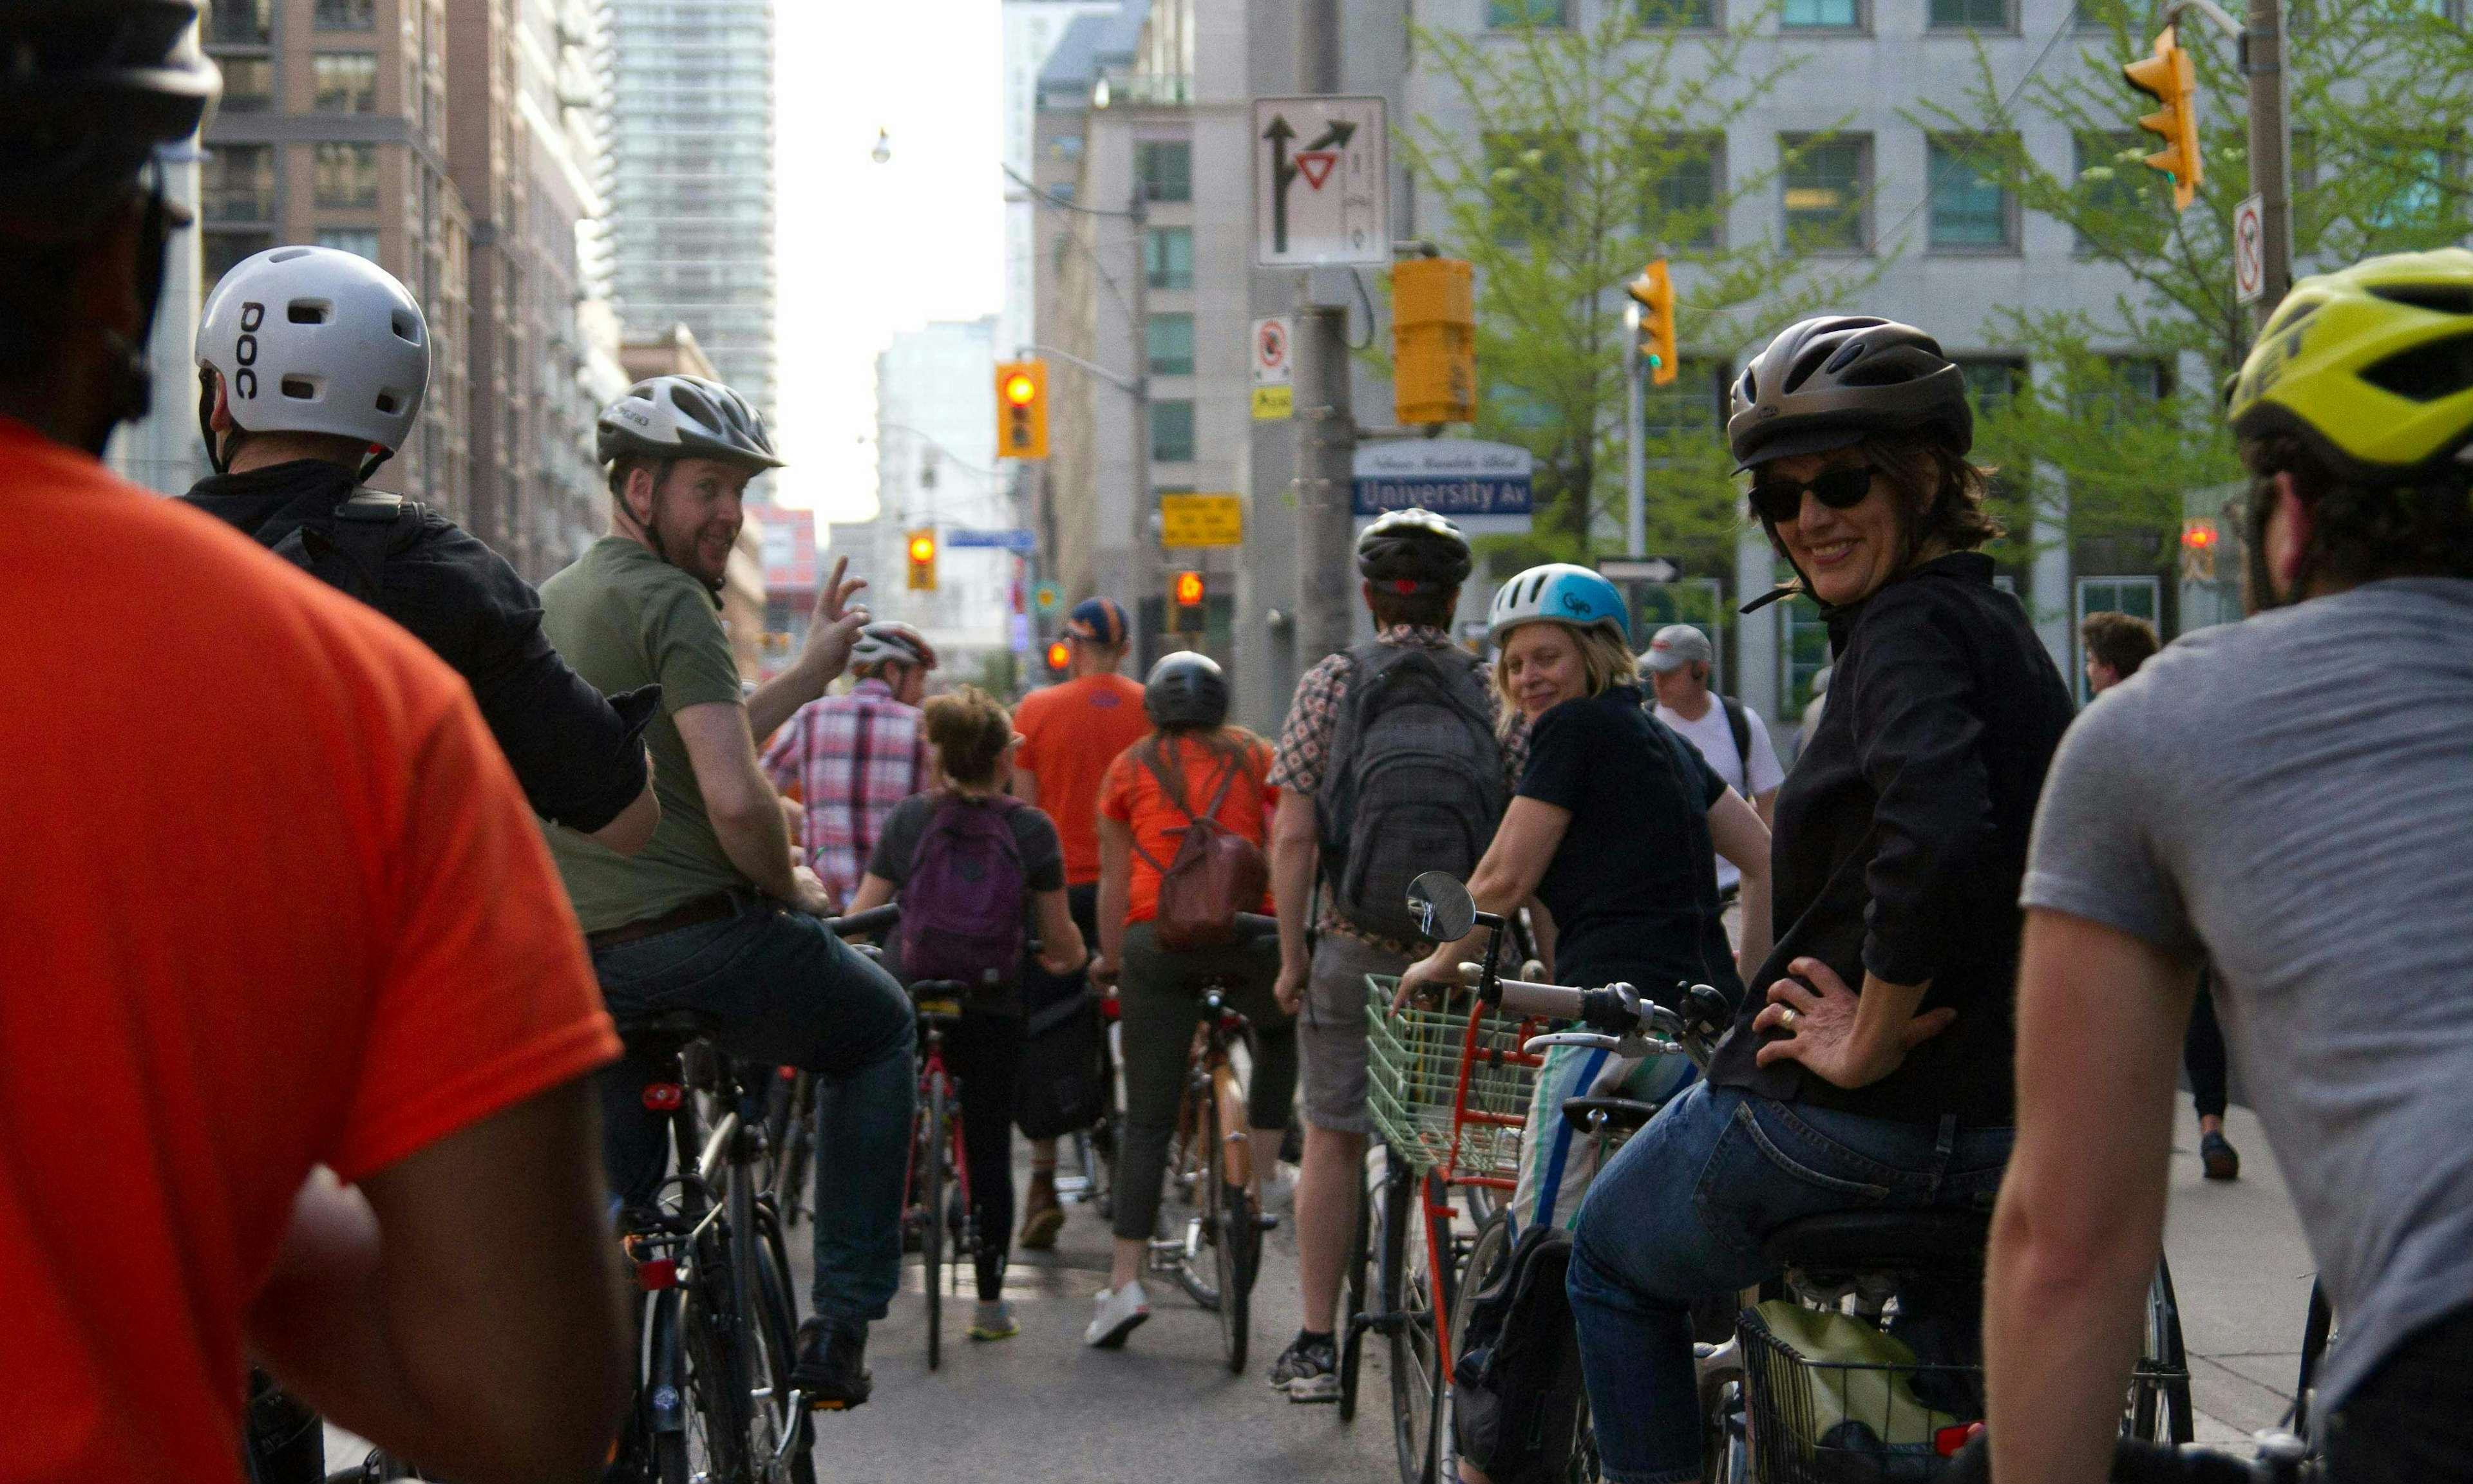 Group of cyclists in Toronto